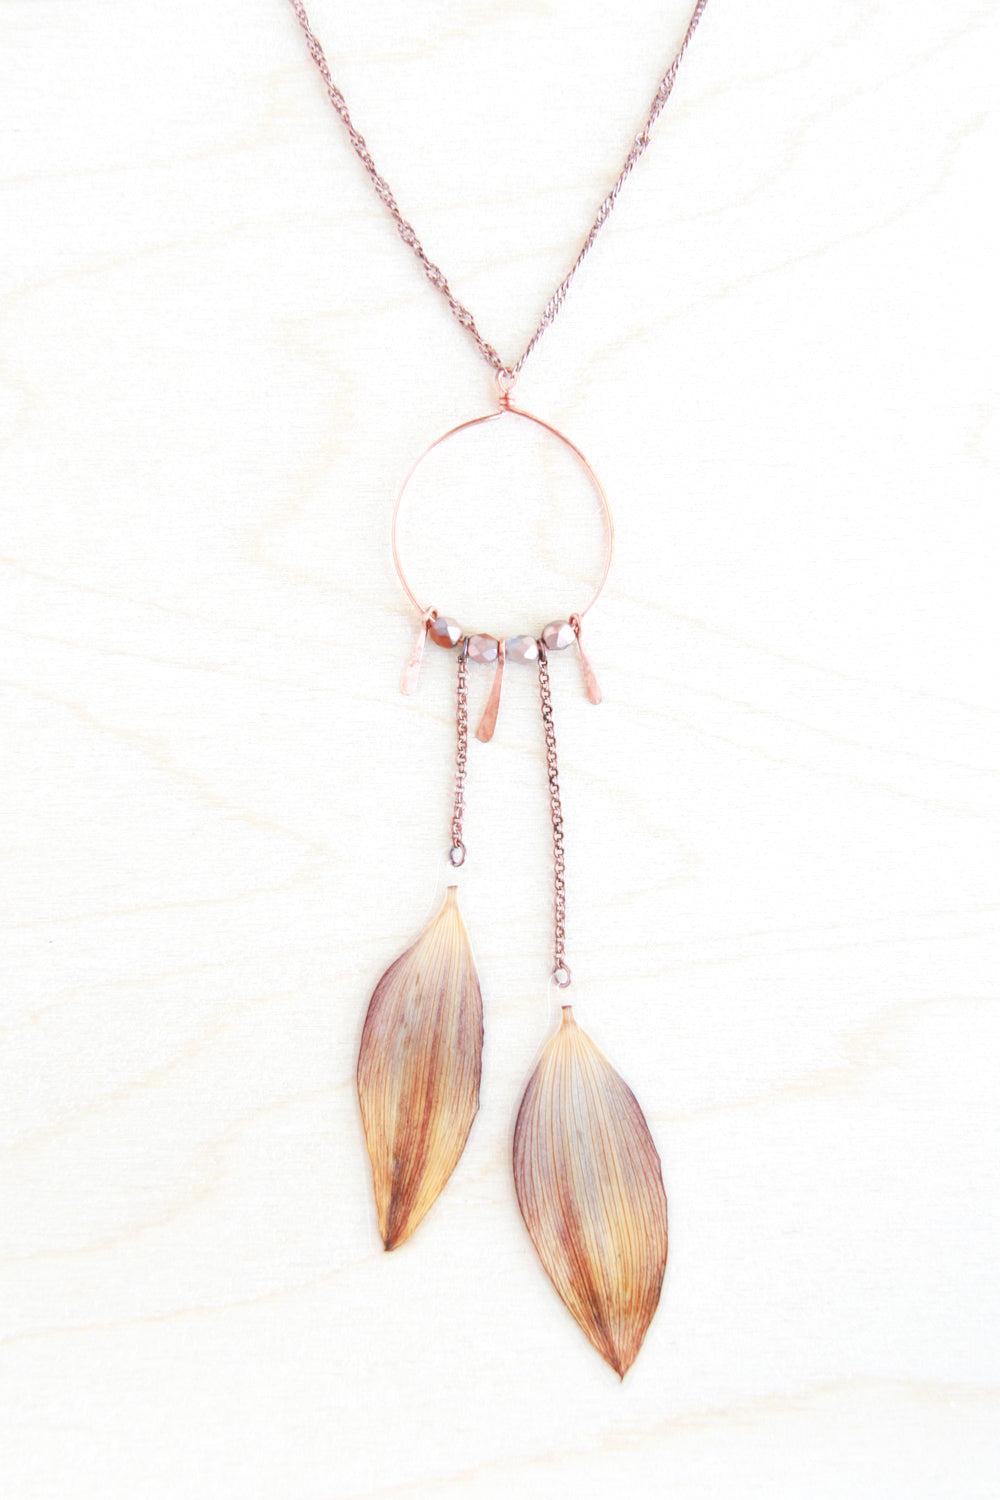 Brown & Yellow Sunflower Pressed Flower Necklace with Copper Hoop, Hammered Sun Rays, and Burnt Umber Glass Beads